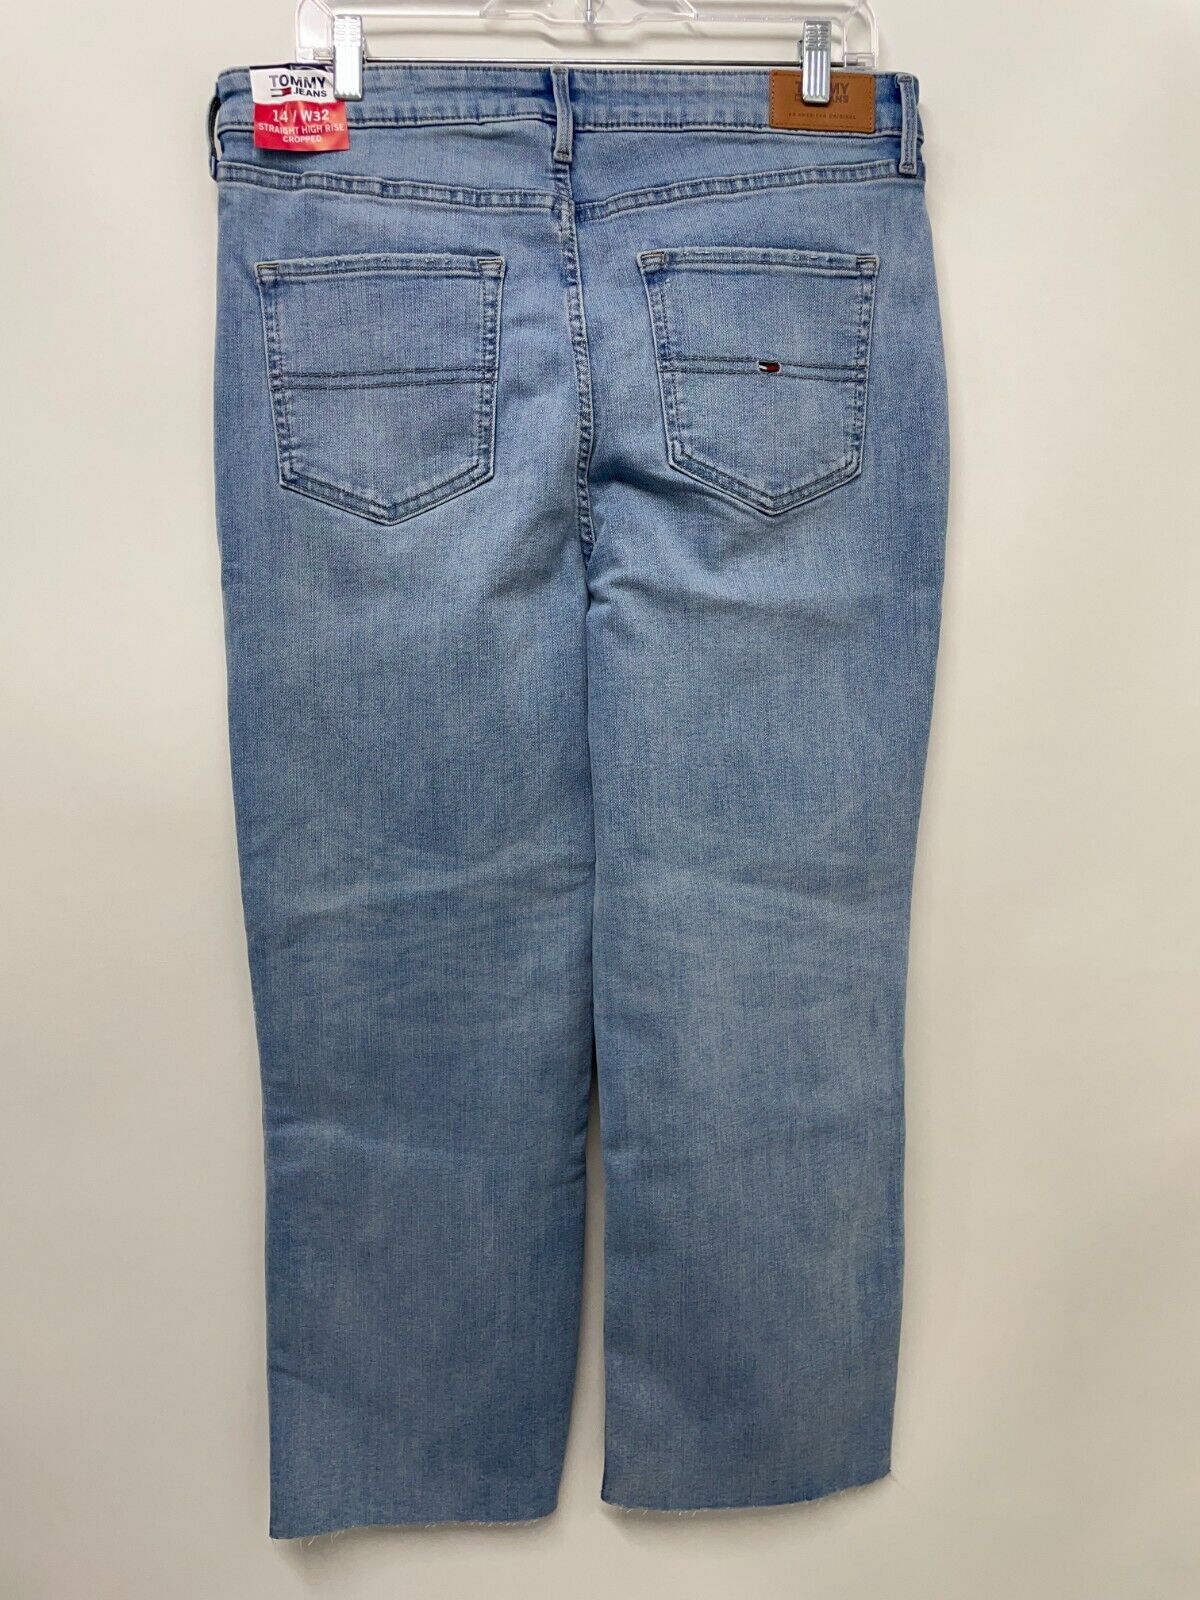 Tommy Hilfiger Womens 14 Straight High Rise Cropped Jeans Medium Wash Distressed